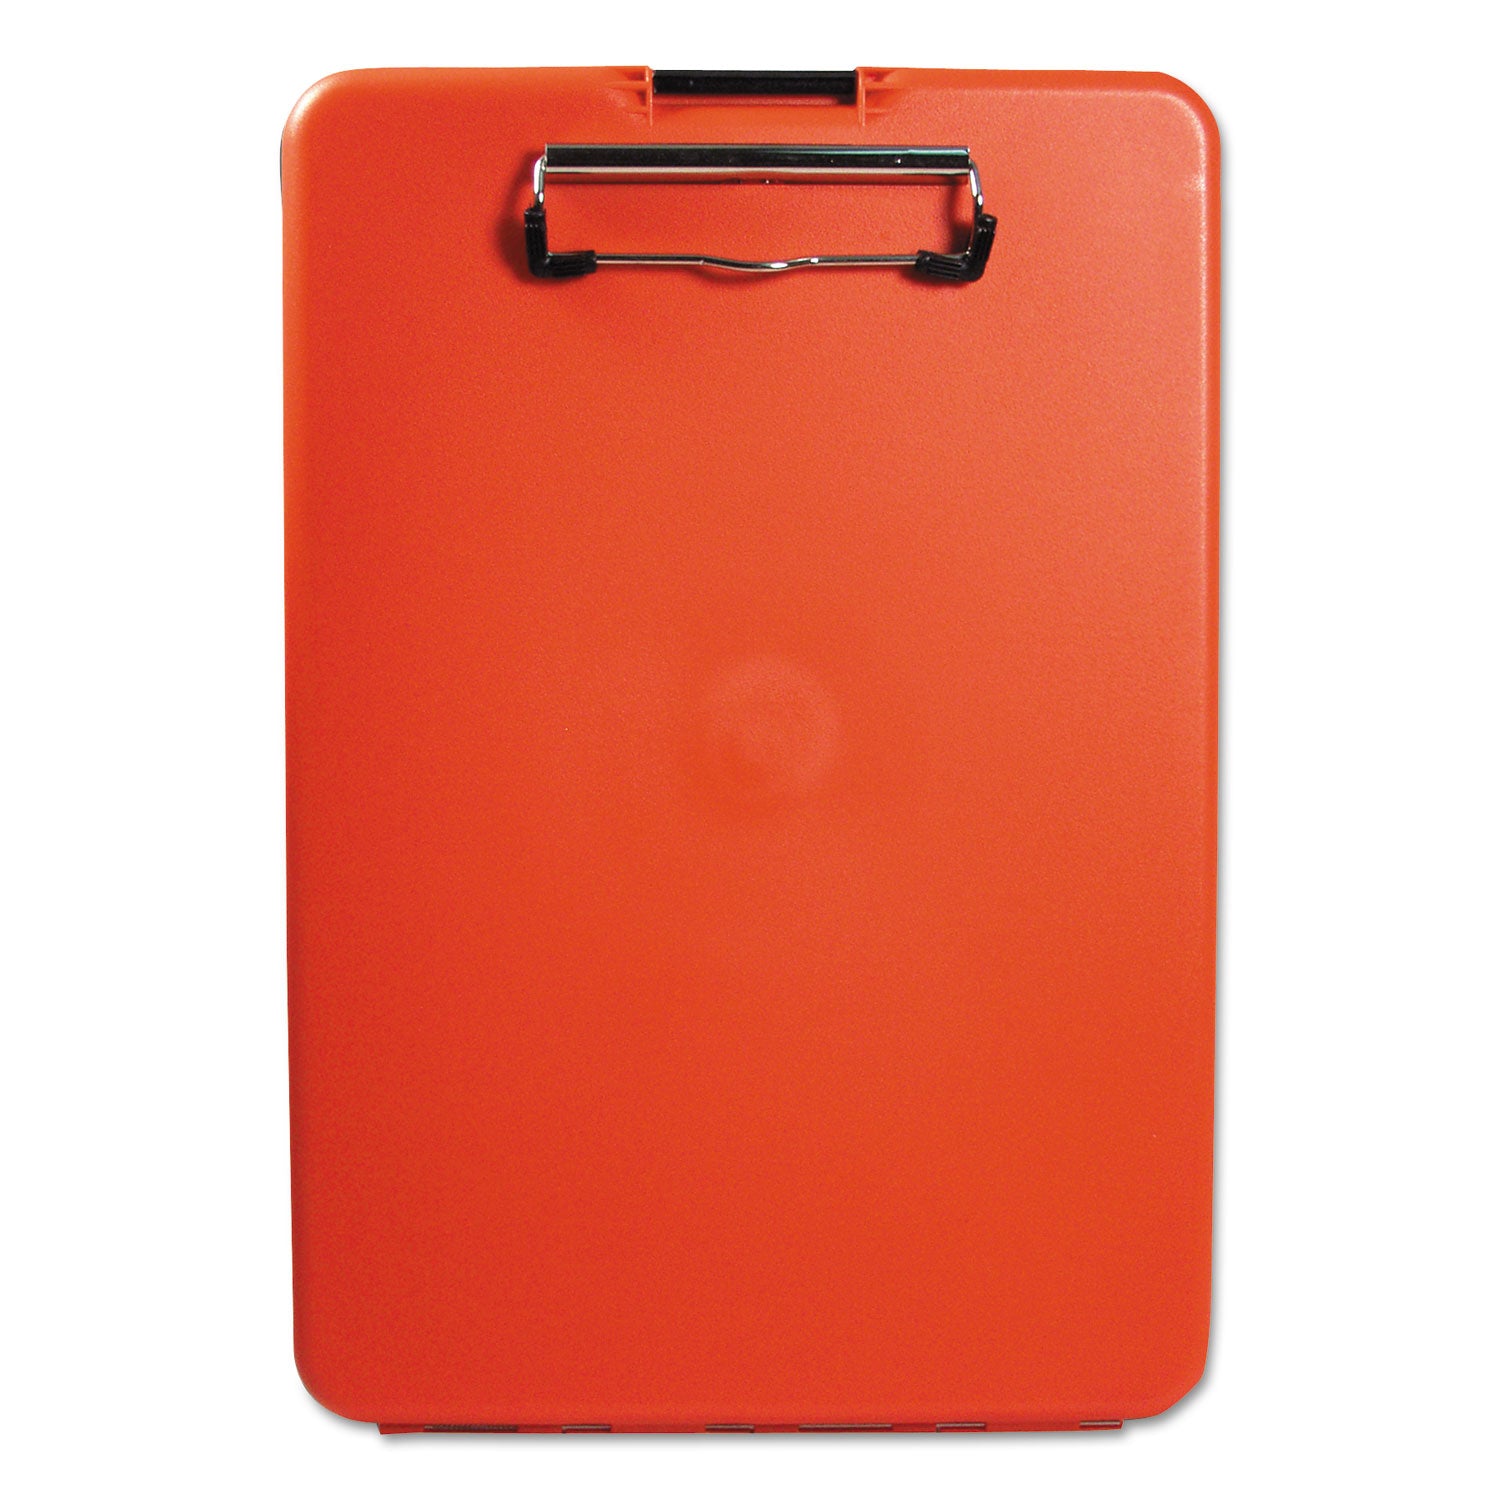 SlimMate Storage Clipboard, 0.5" Clip Capacity, Holds 8.5 x 11 Sheets, Red - 